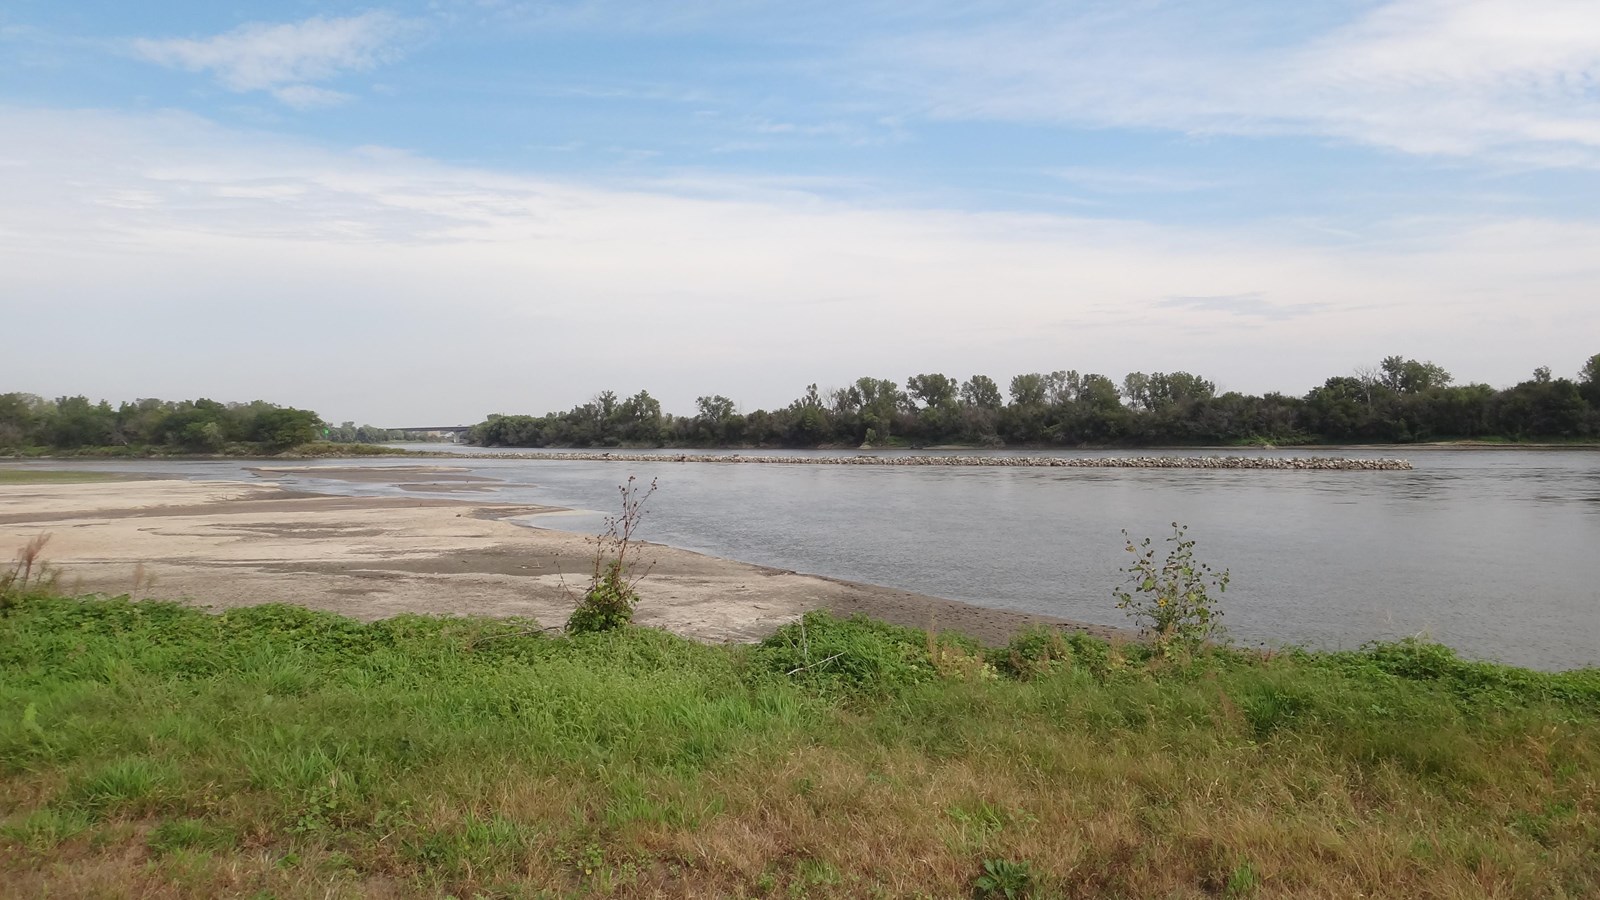 large wide river with sandbars in the foreground